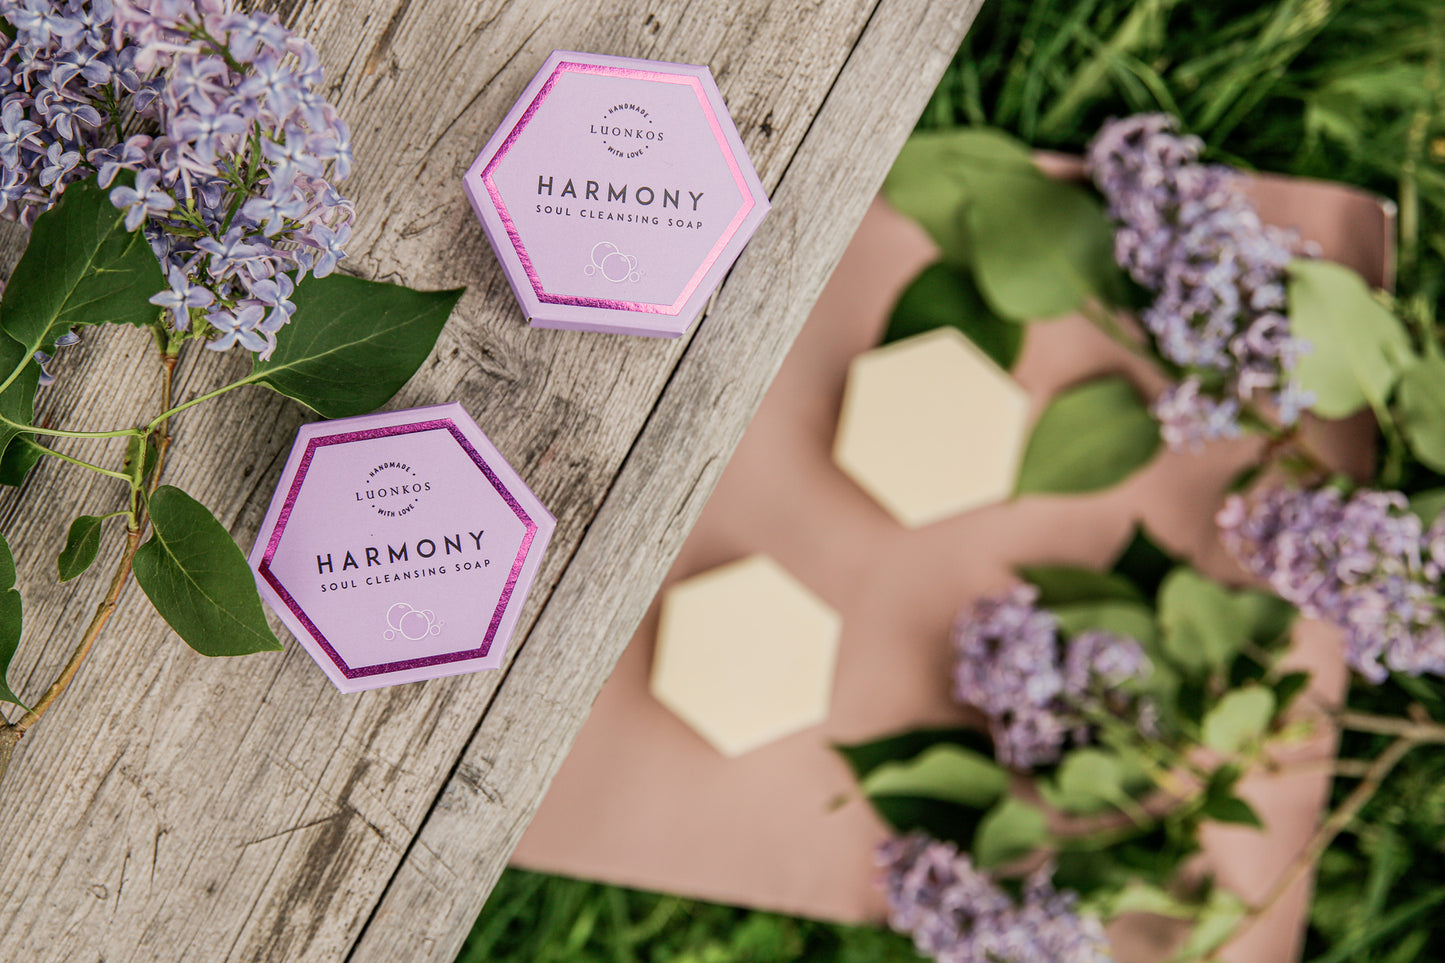 Harmony Soul Cleansing Soap